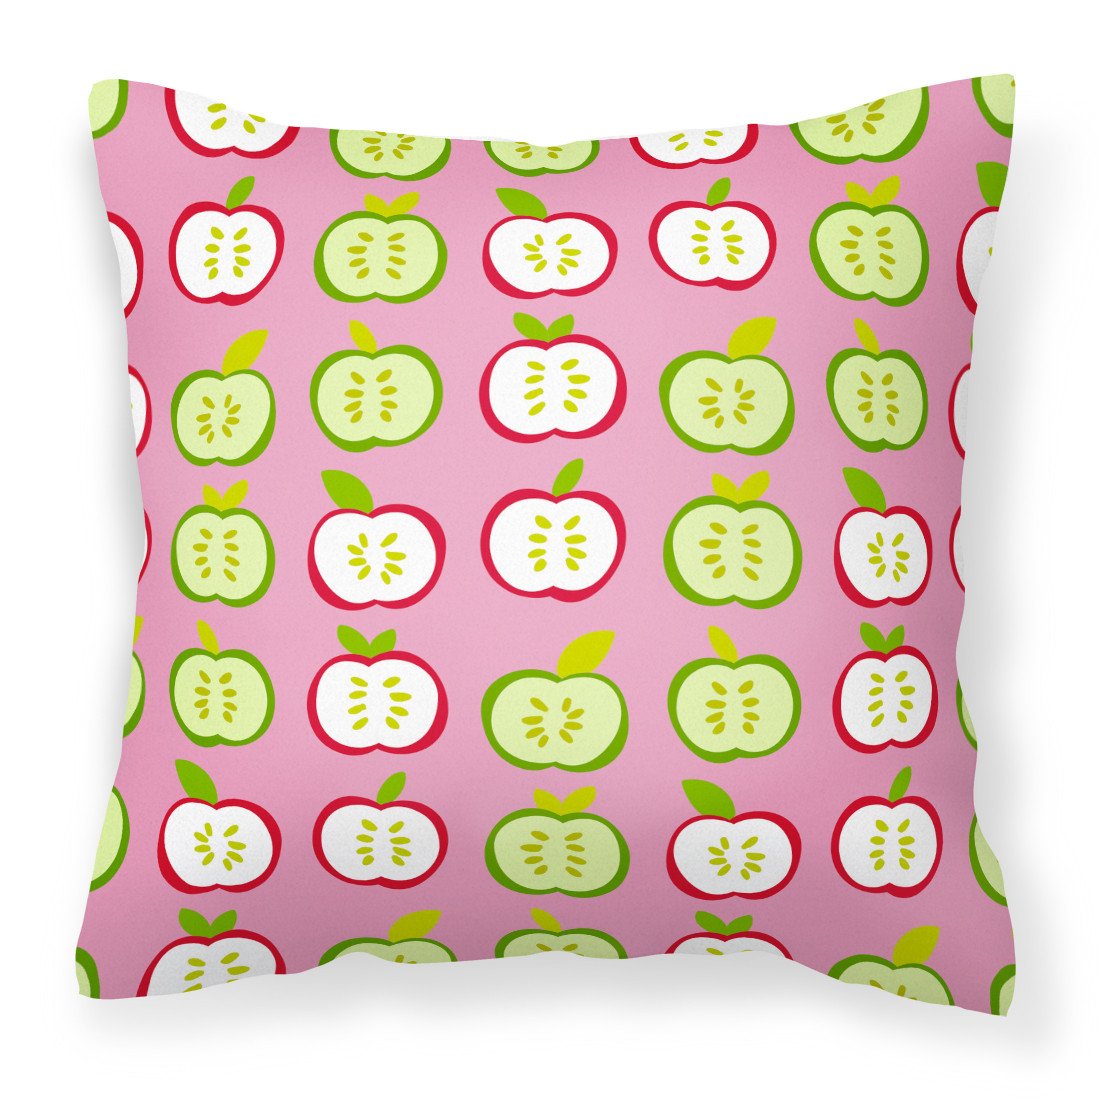 Apples on Pink Fabric Decorative Pillow BB5141PW1818 by Caroline's Treasures